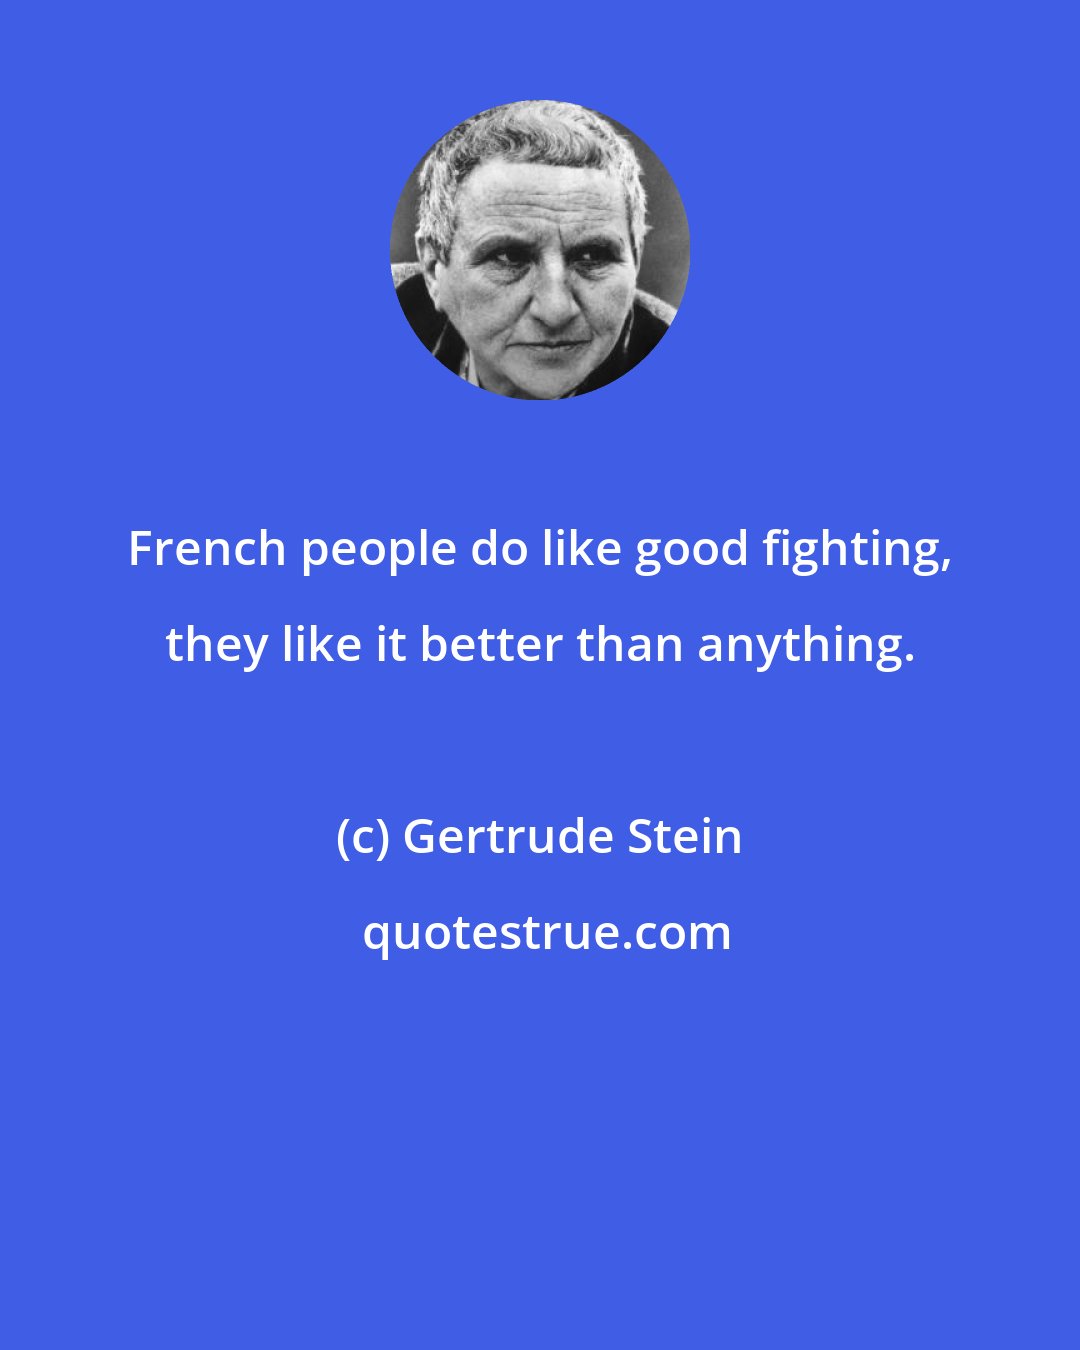 Gertrude Stein: French people do like good fighting, they like it better than anything.